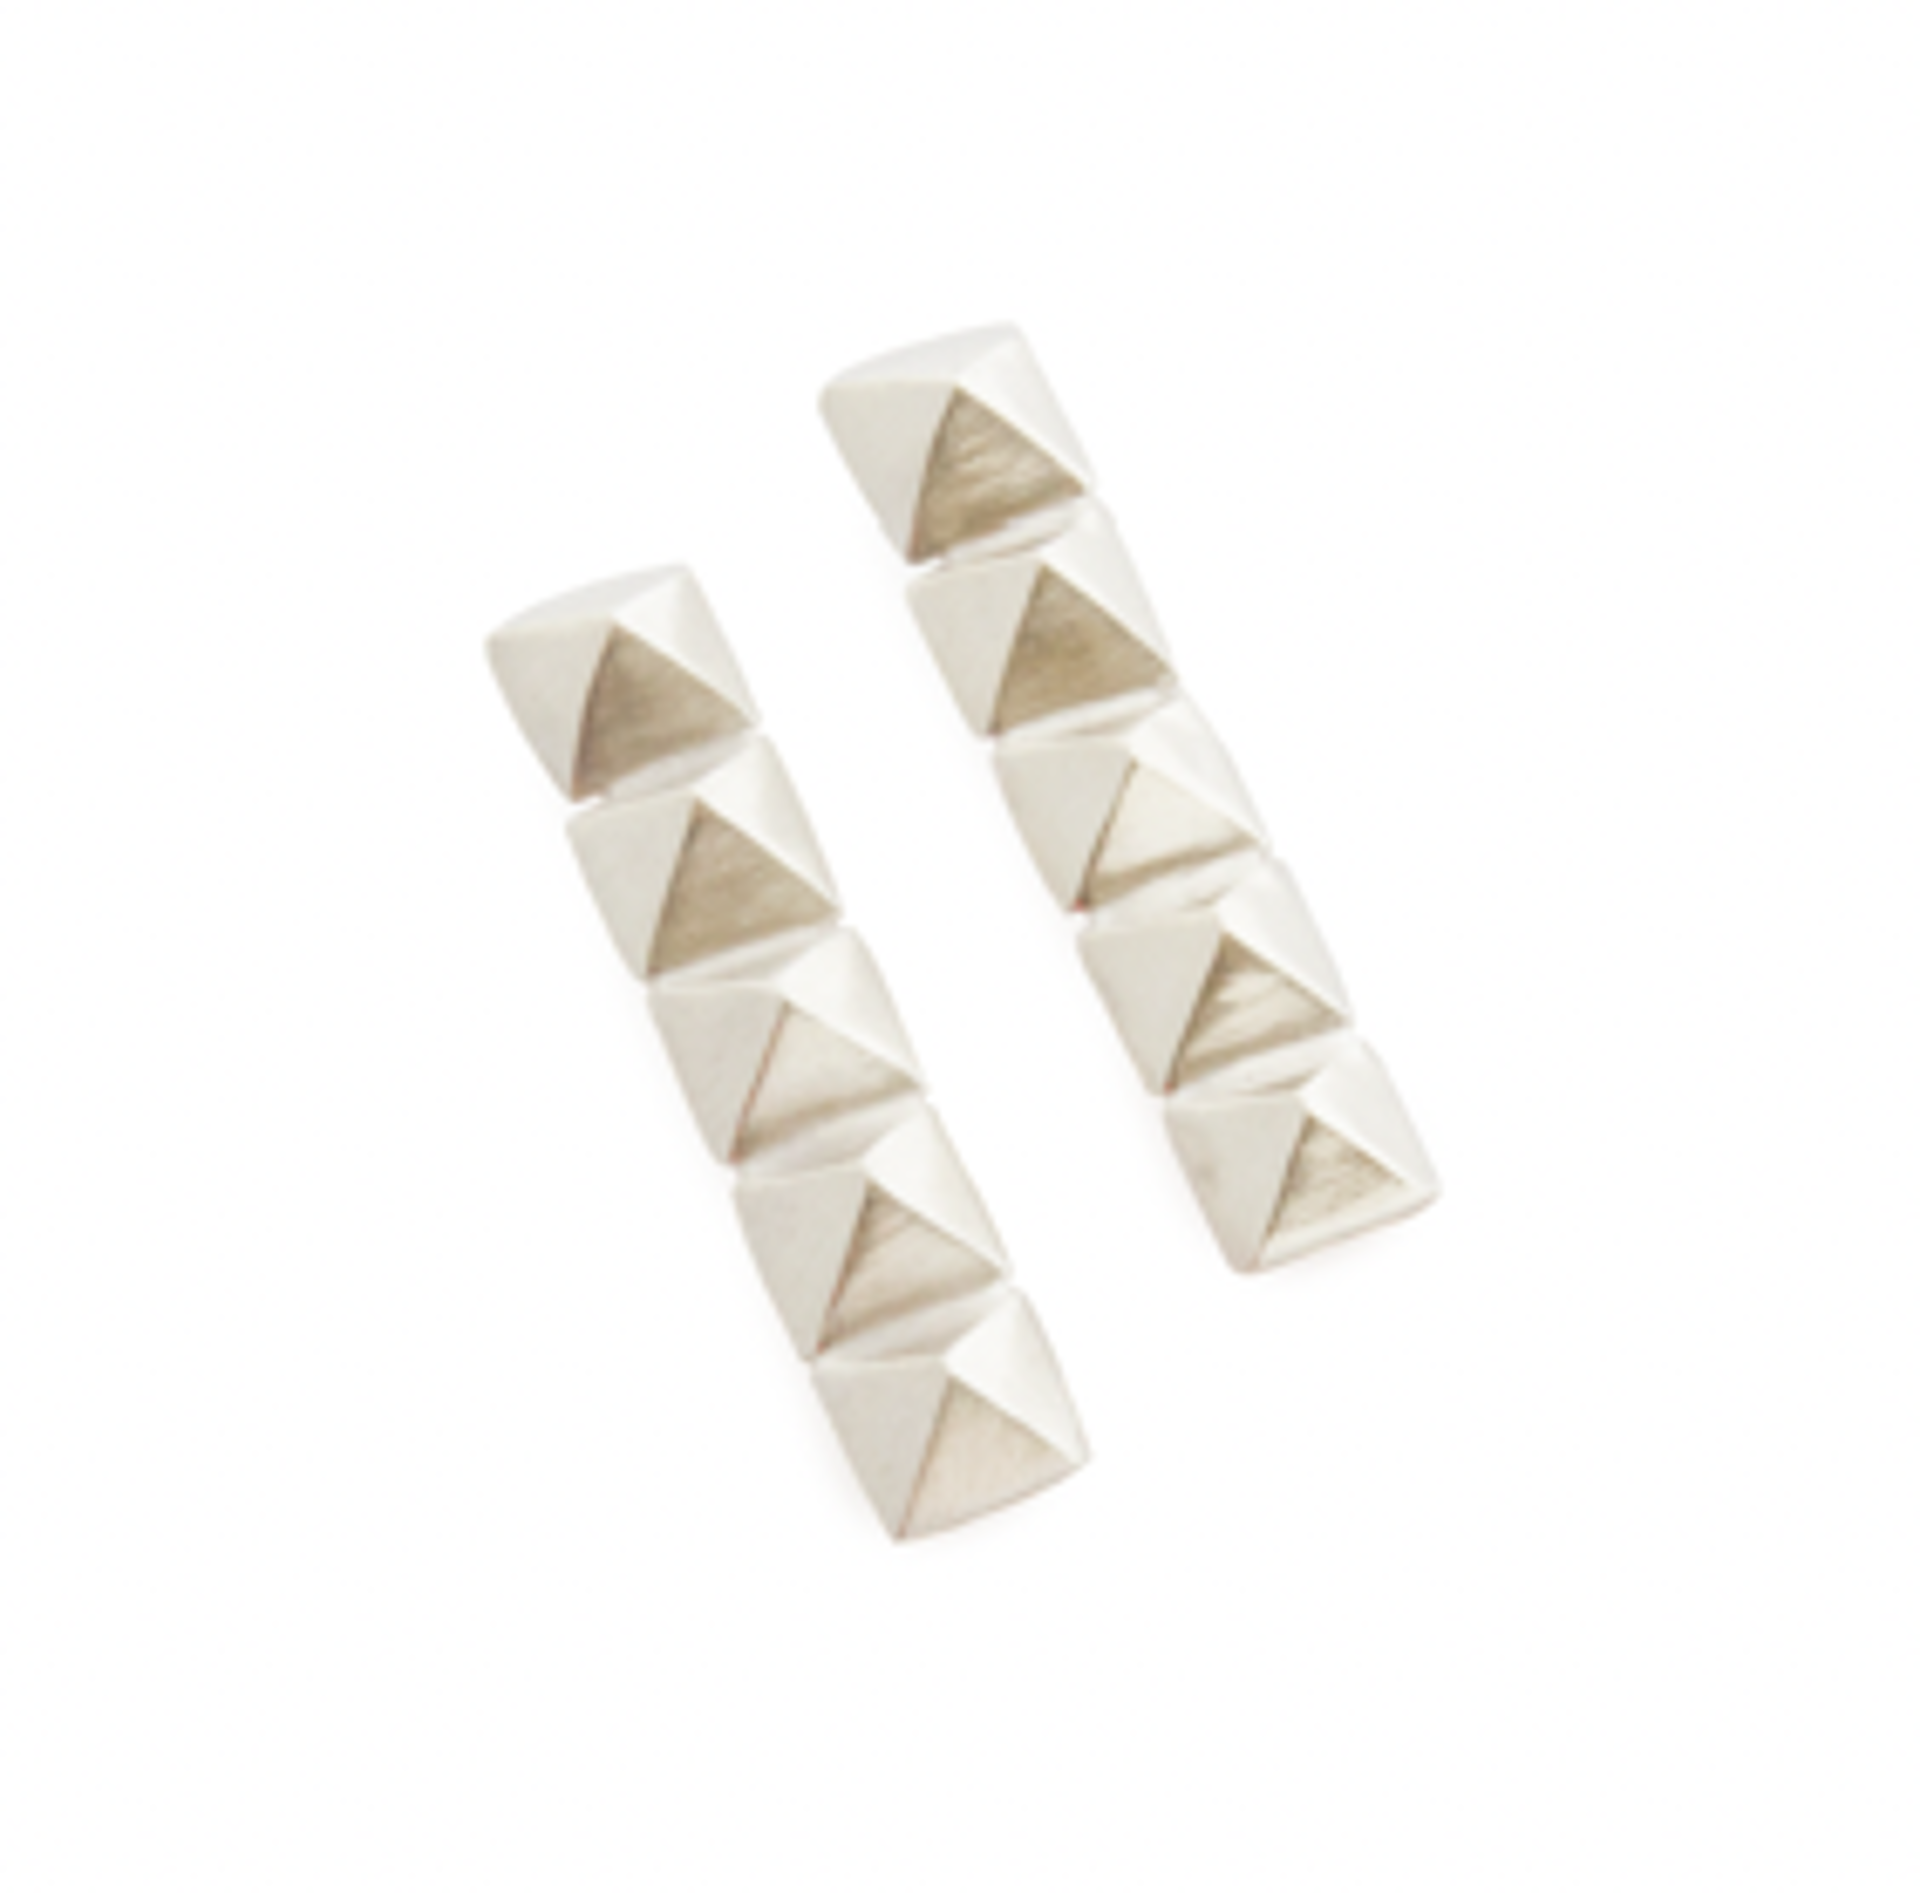 Pyramid Stacked Stud Earrings - Sterling by Audrey Laine